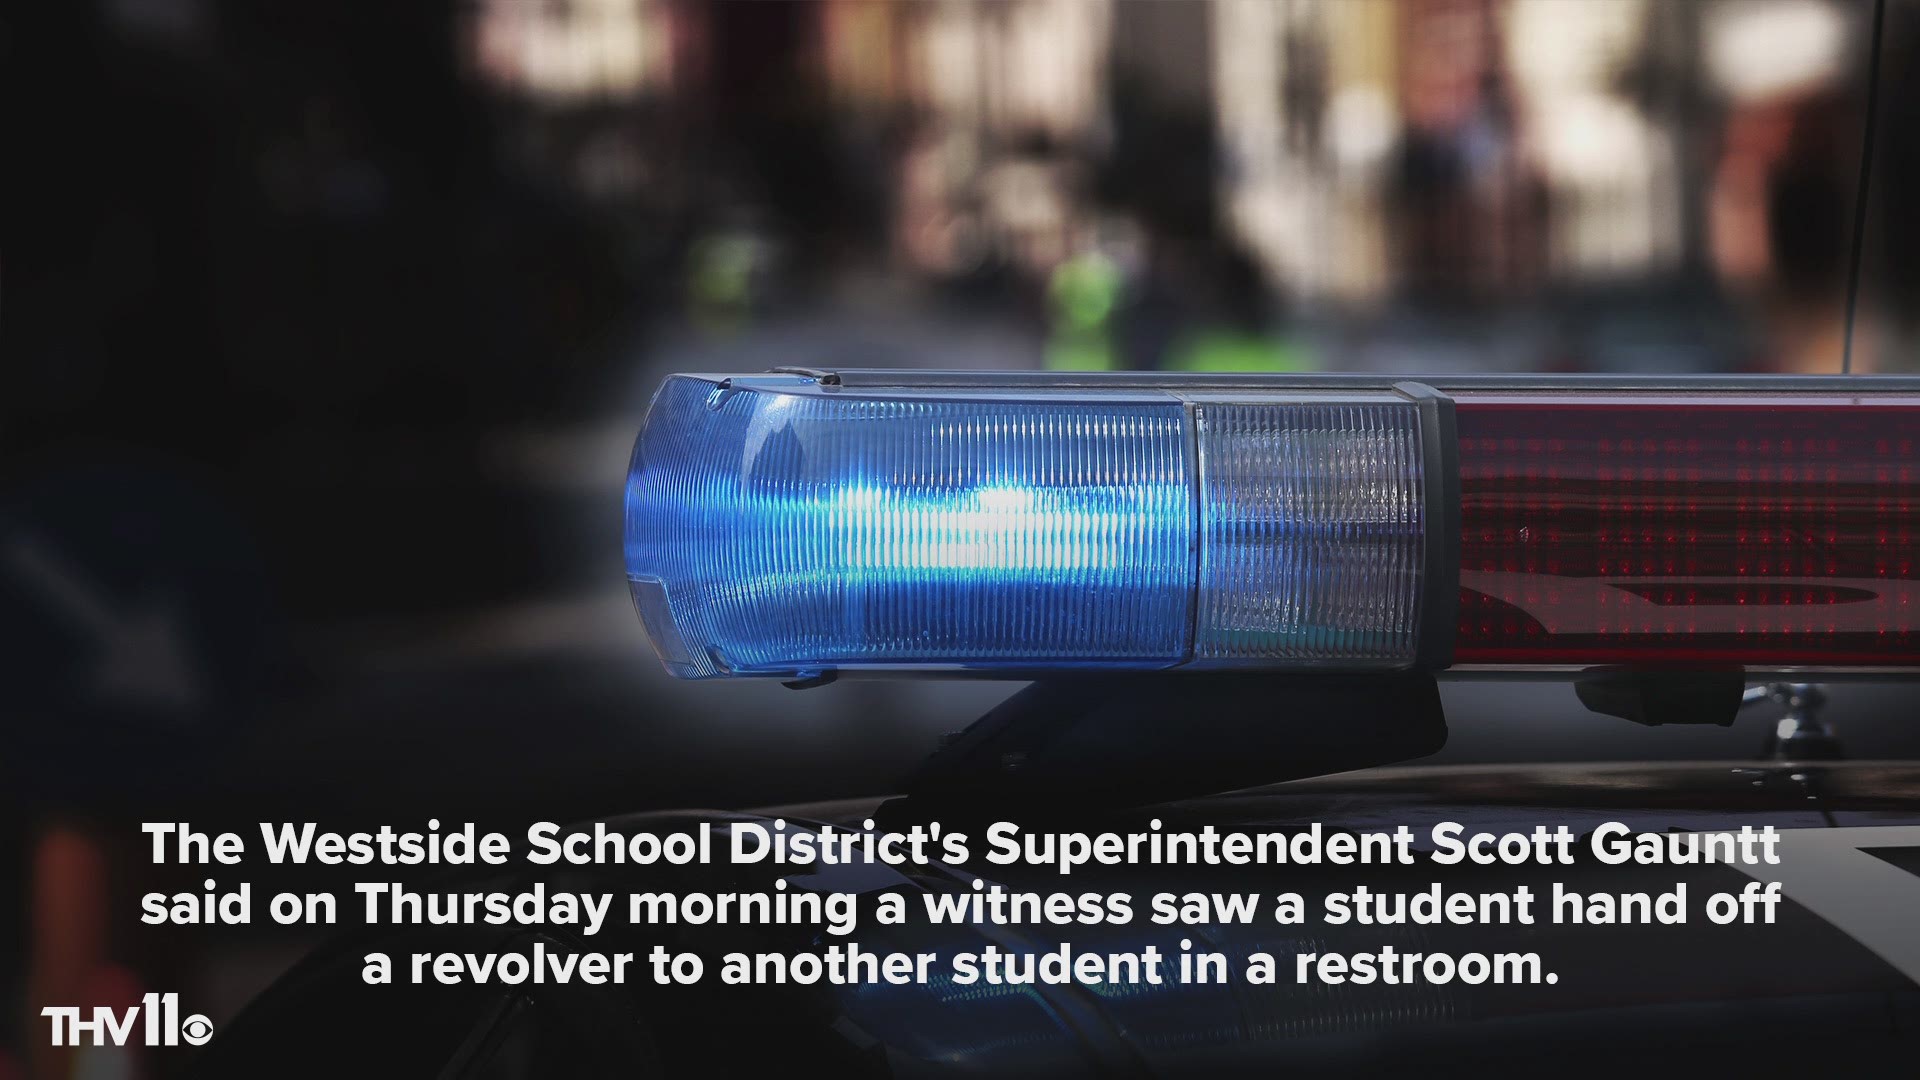 According to the superintendent, two middle school students were arrested with a revolver in a Jonesboro school.